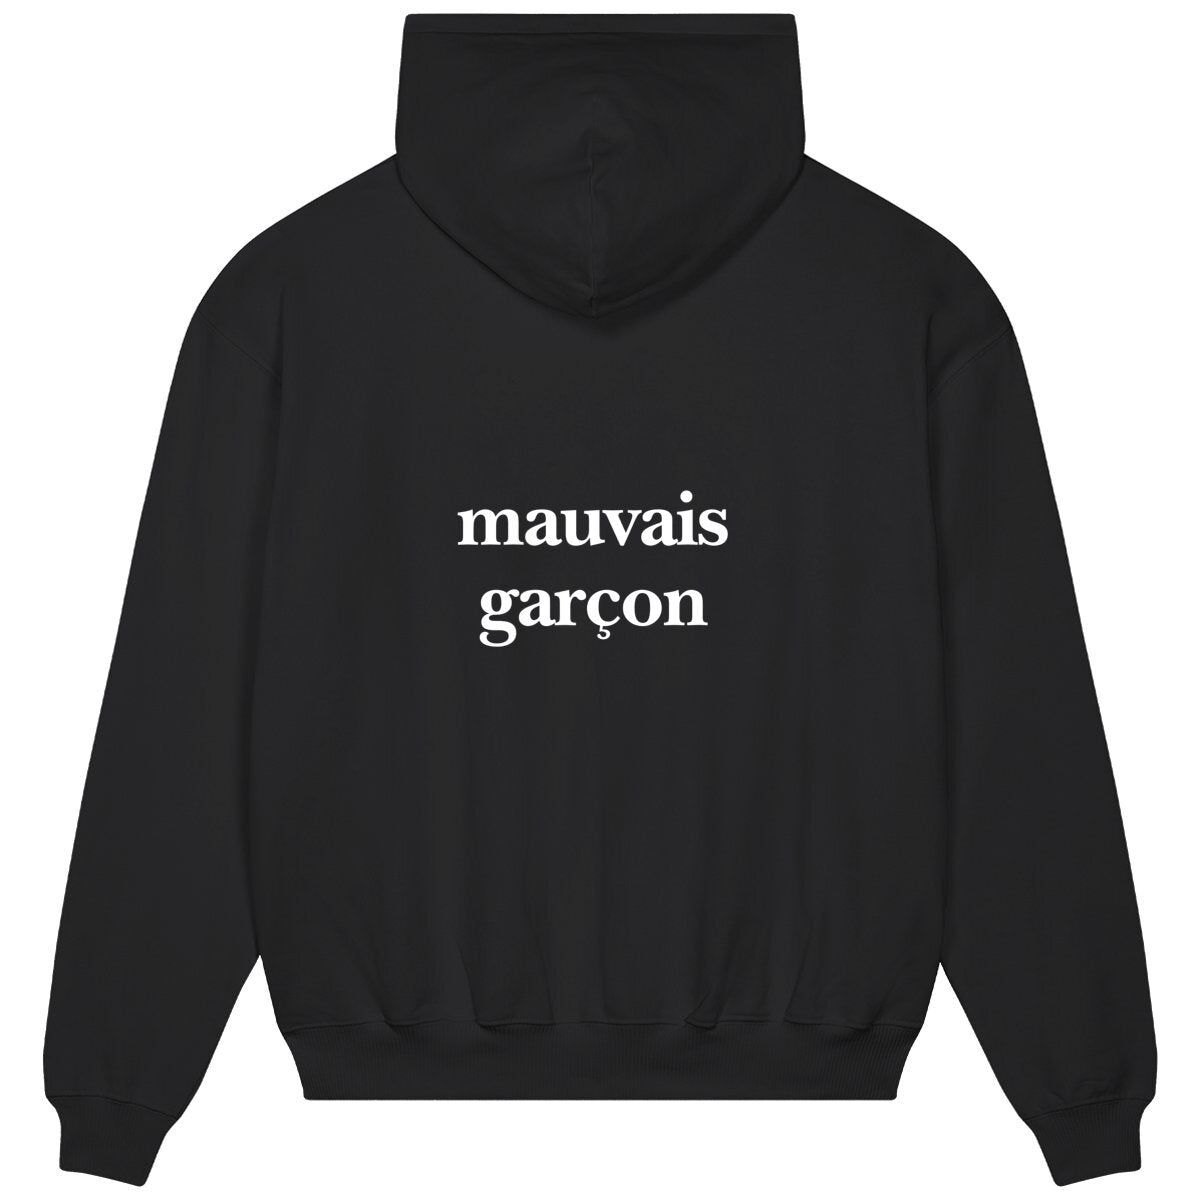 mauvais garçon hoodie over. garçon garçon essentiel black oversized hoodie. Encapsulate effortless Parisian cool with this hoodie, its subtle 'mauvais garçons ON THE BACK' emblem whispering understated sophistication. Crafted for comfort, styled for streets of Paris.